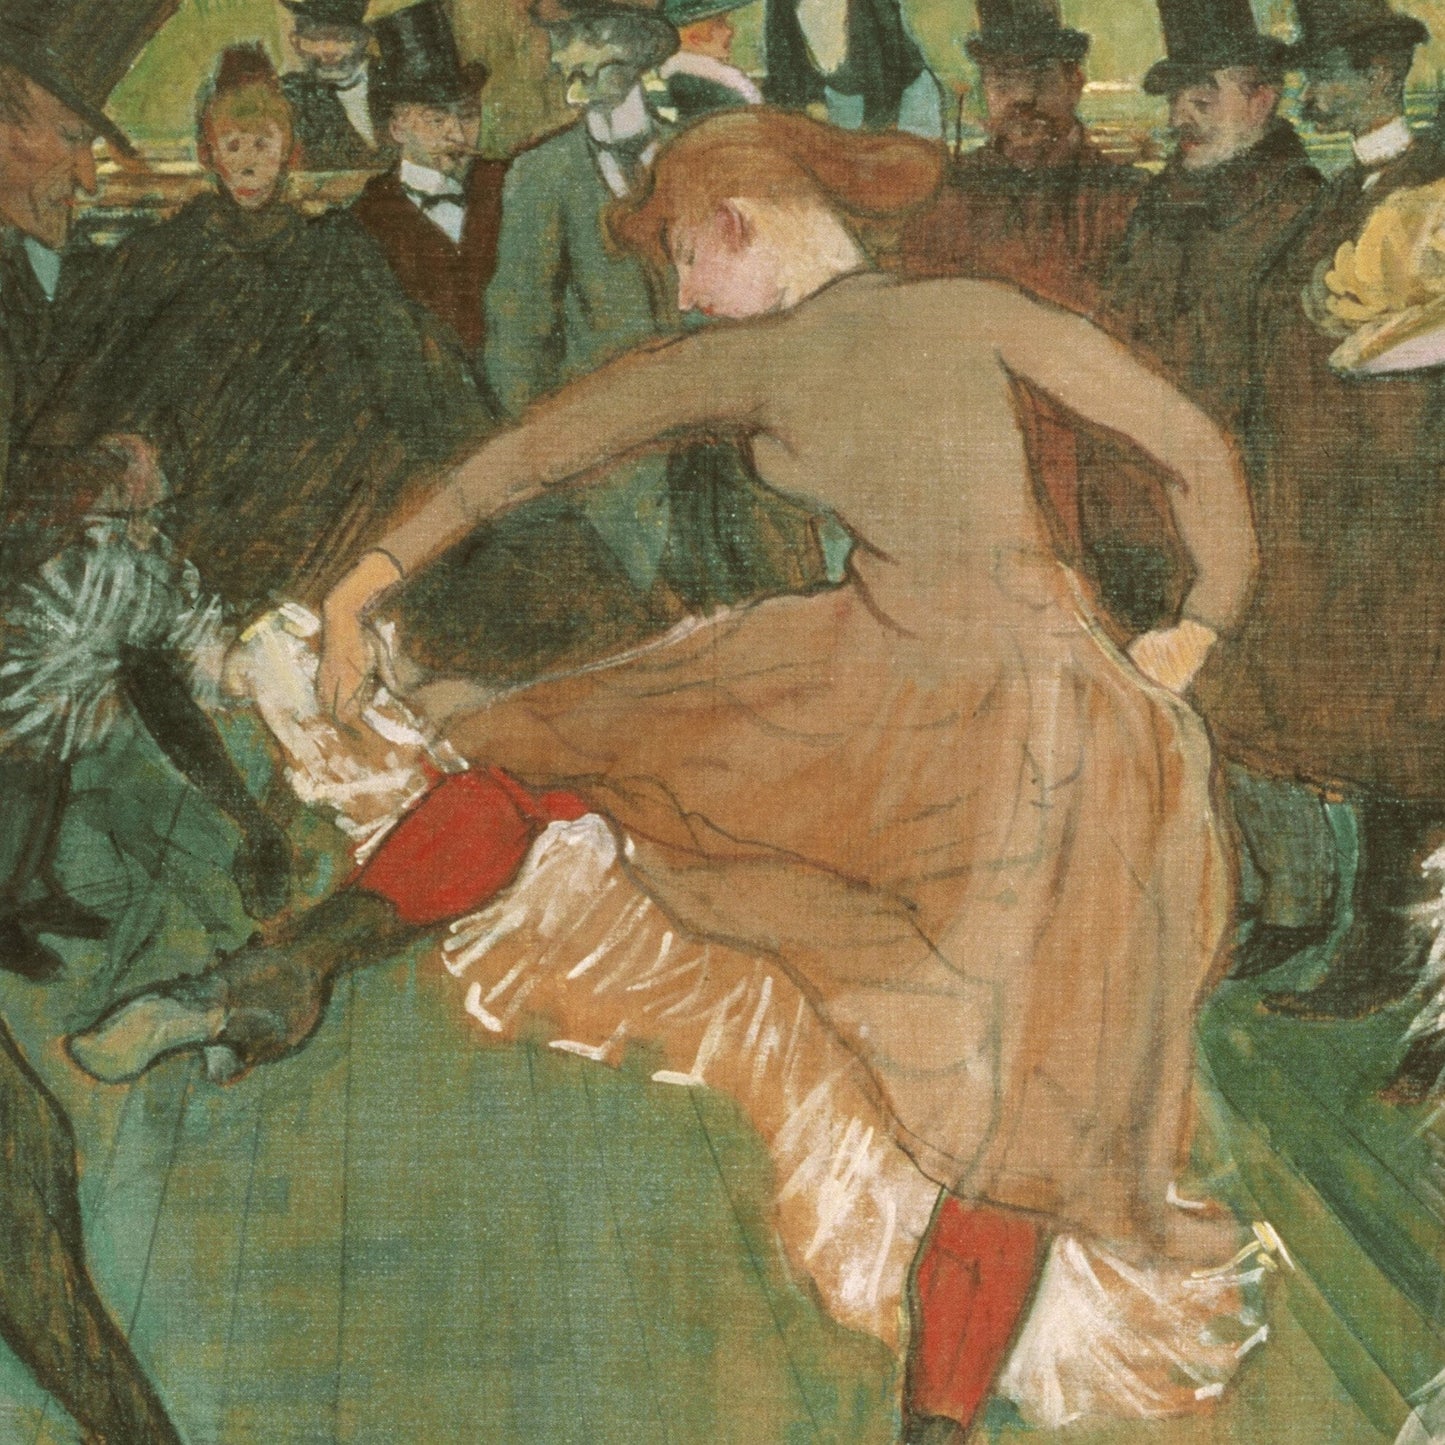 Lautrec-At the Moulin Rouge by Henri de Toulouse, 3d Printed with texture and brush strokes looks like original oil-painting, code:338